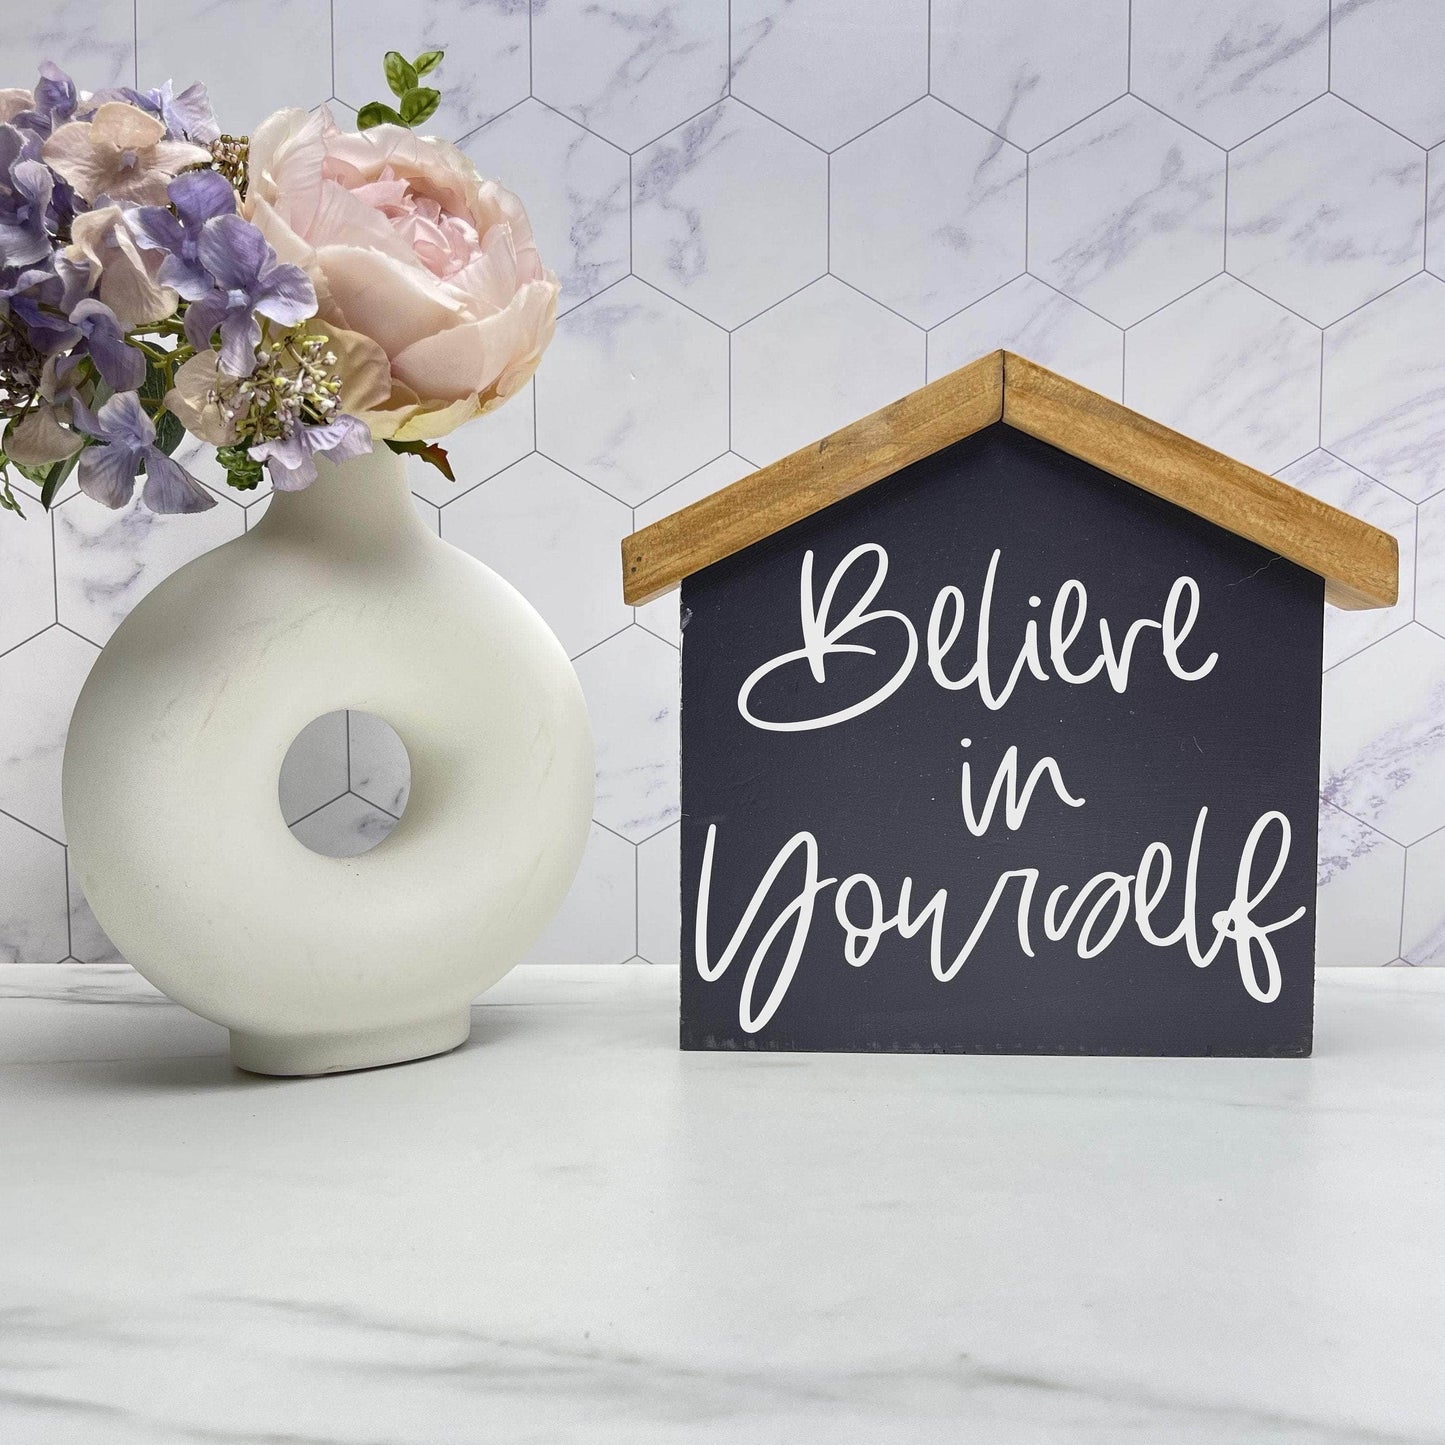 Believe in yourself  wood sign, quote sign, rustic decor, home decor